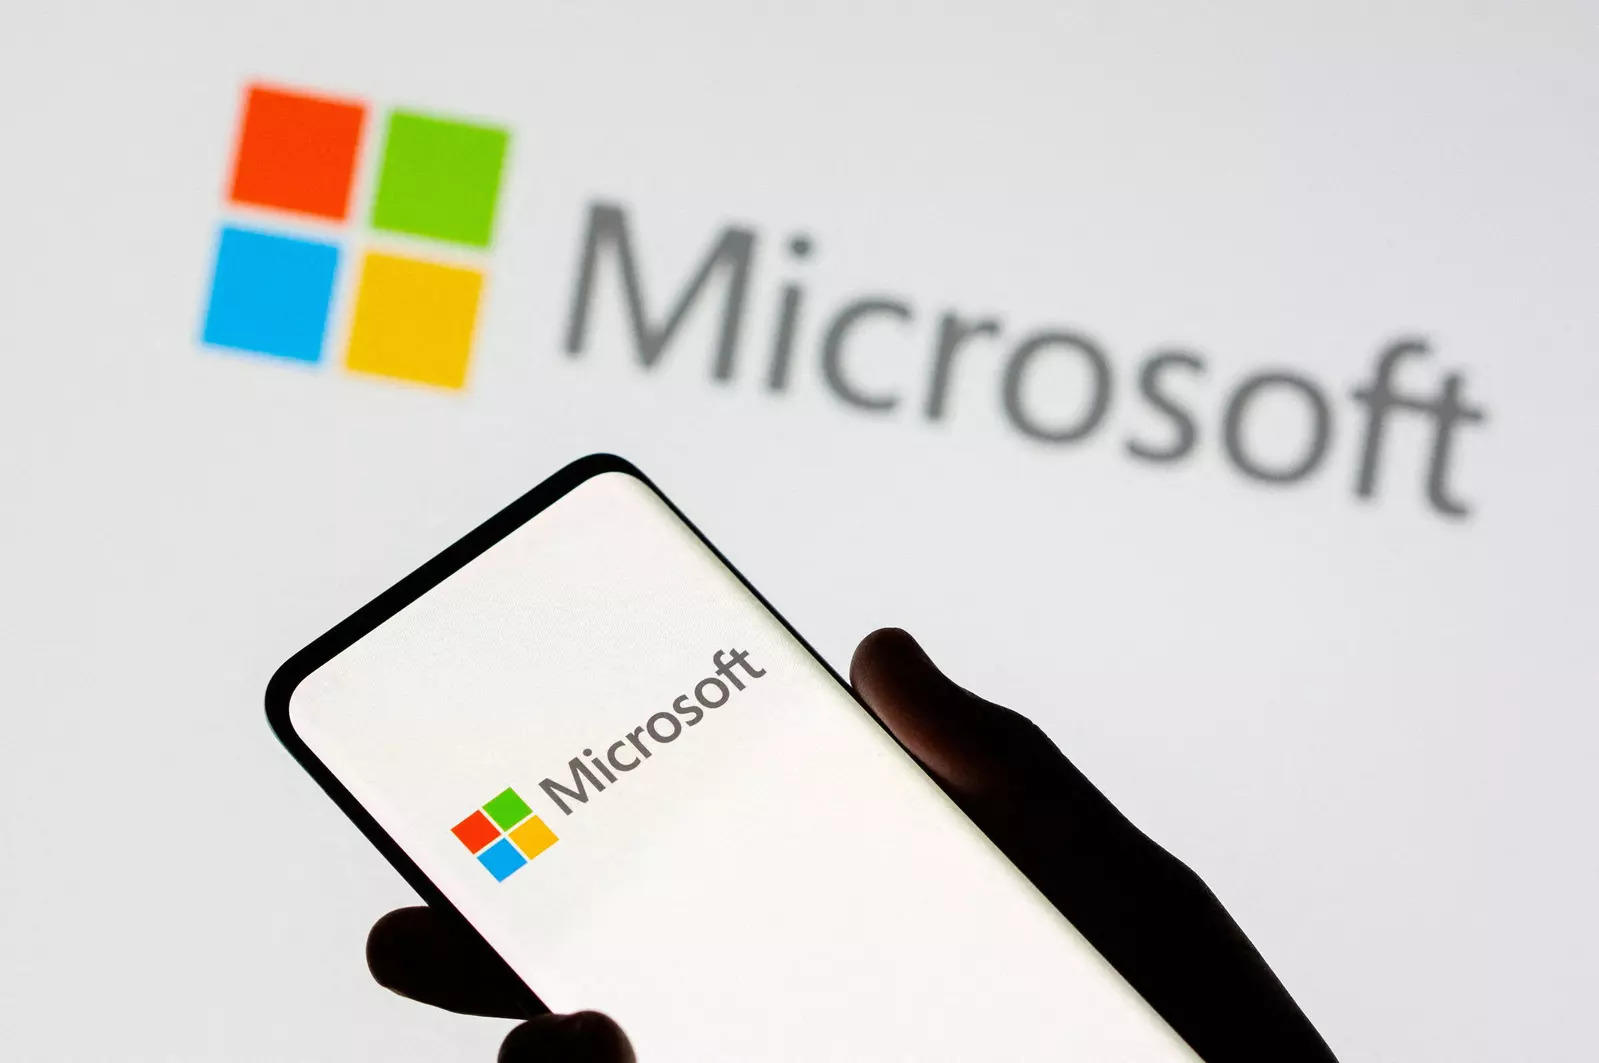 Microsoft President and Vice Chair Brad Smith on Thursday said that technology can help solve some of India's biggest challenges like climate change and food security